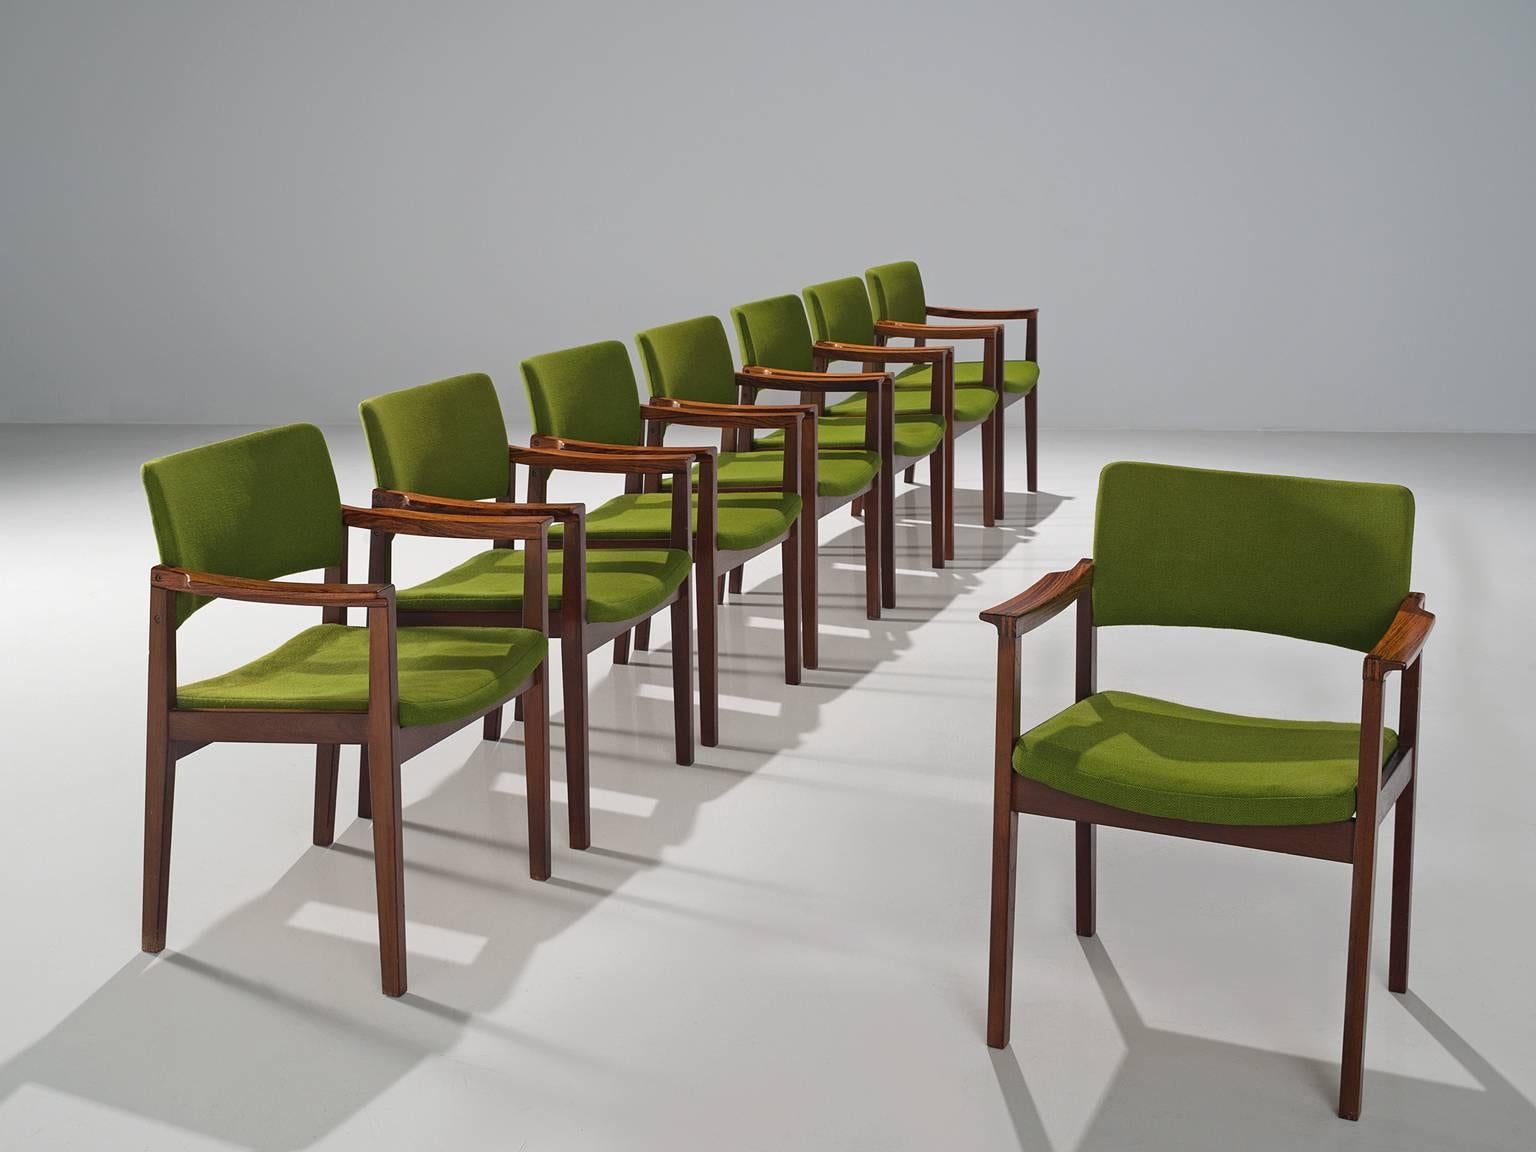 Set of eight dining chairs for Høngstole, green fabric and rosewood, Denmark, 1950s.
 
These solidly constructed rosewood chairs show elegant lines and stunning wood connections. This set of eight shows the Danish design at its best. The visually